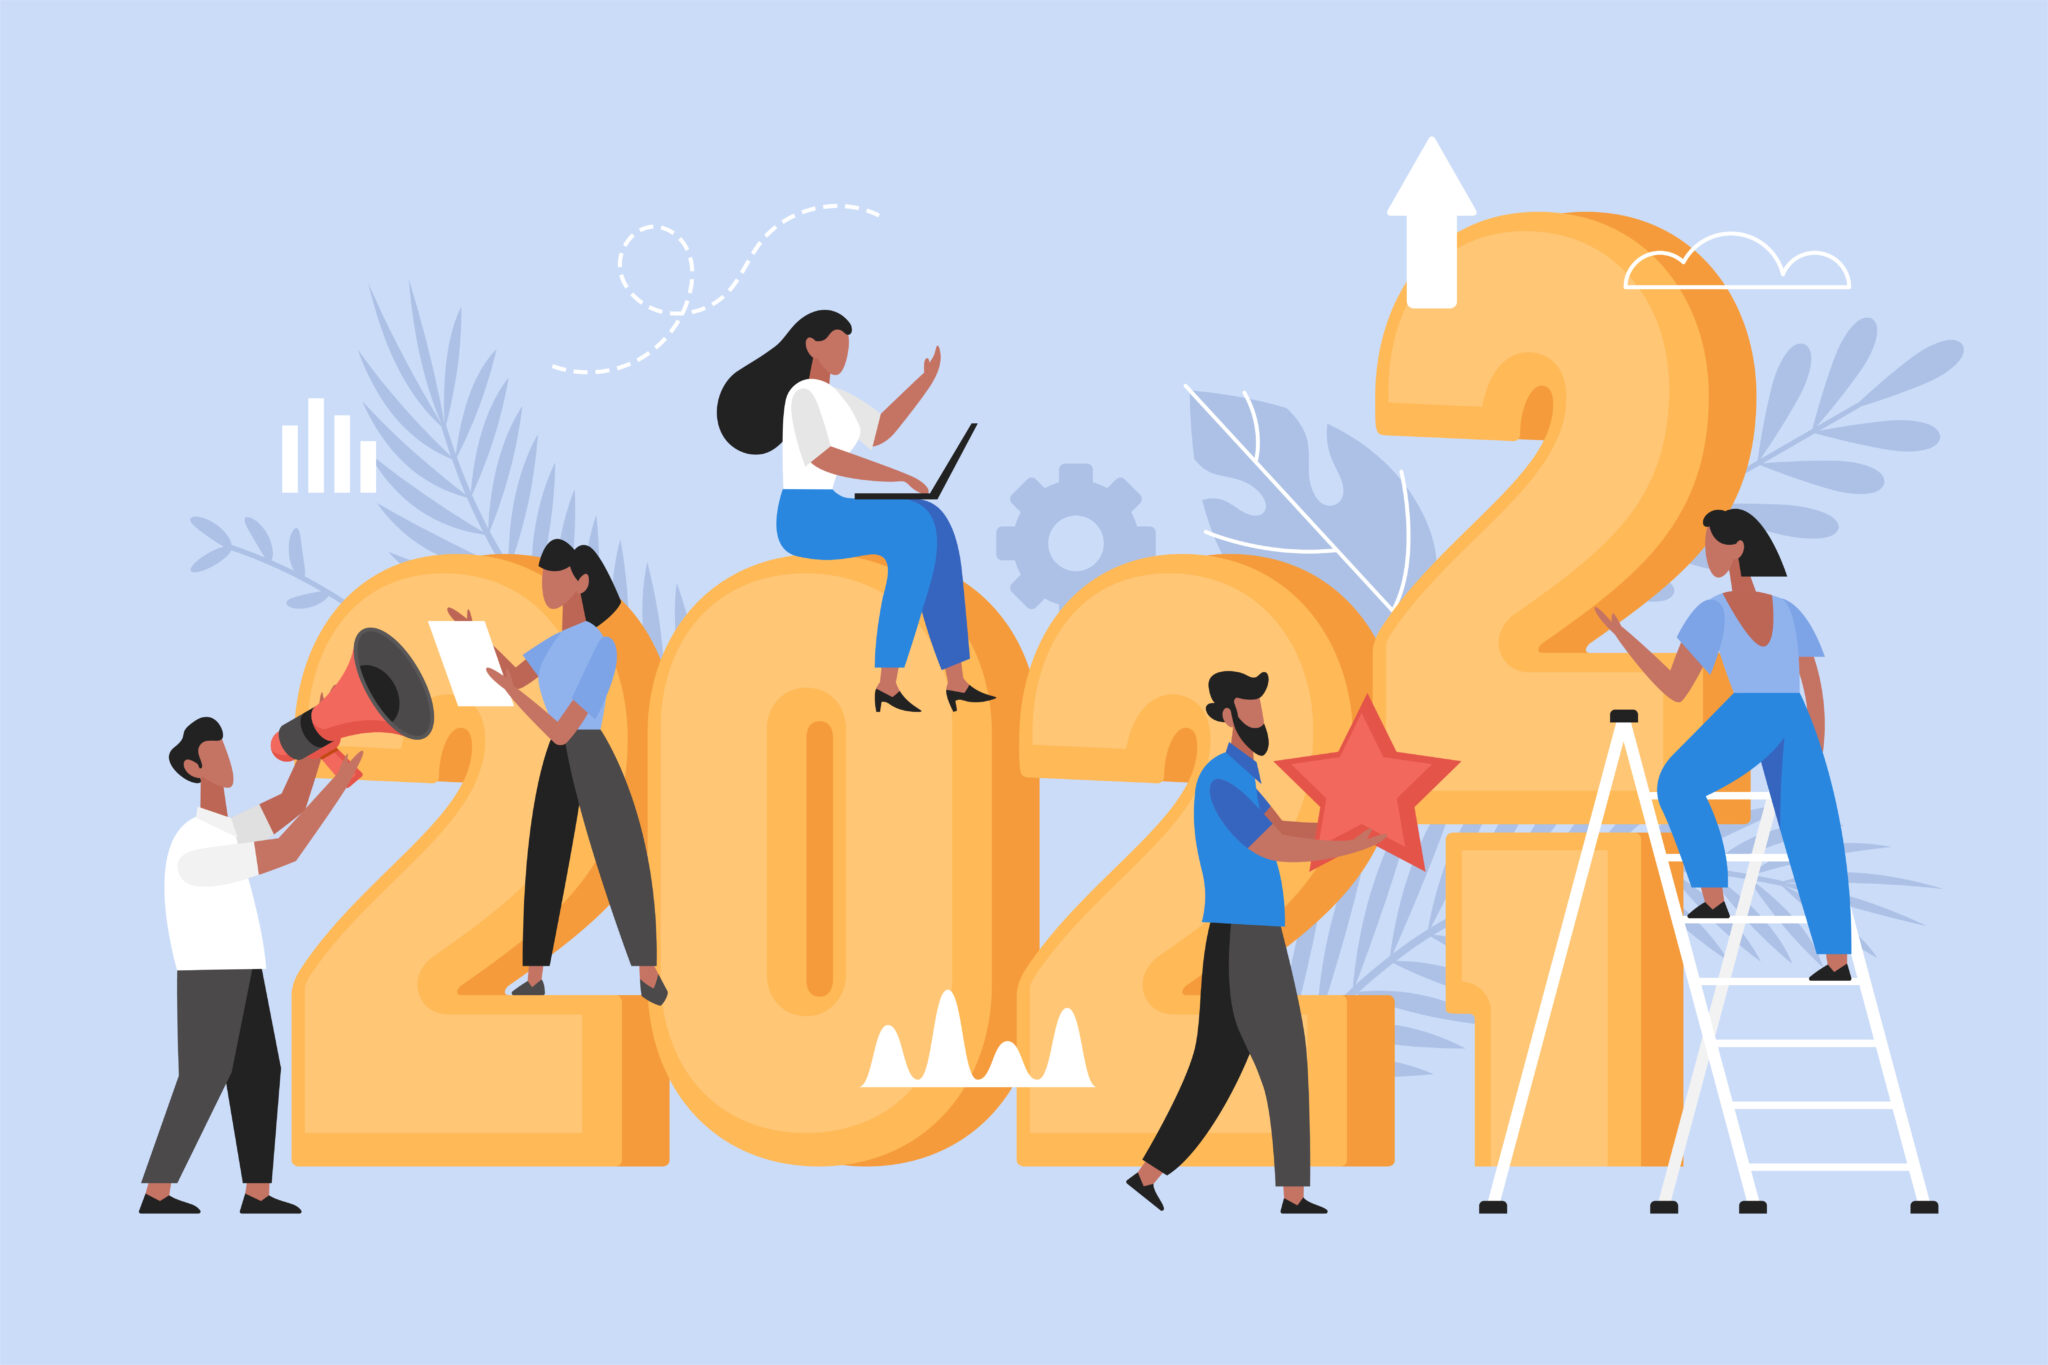 New Year 2022 trends, plans and growth business concept.  Modern vector illustration of people for web design